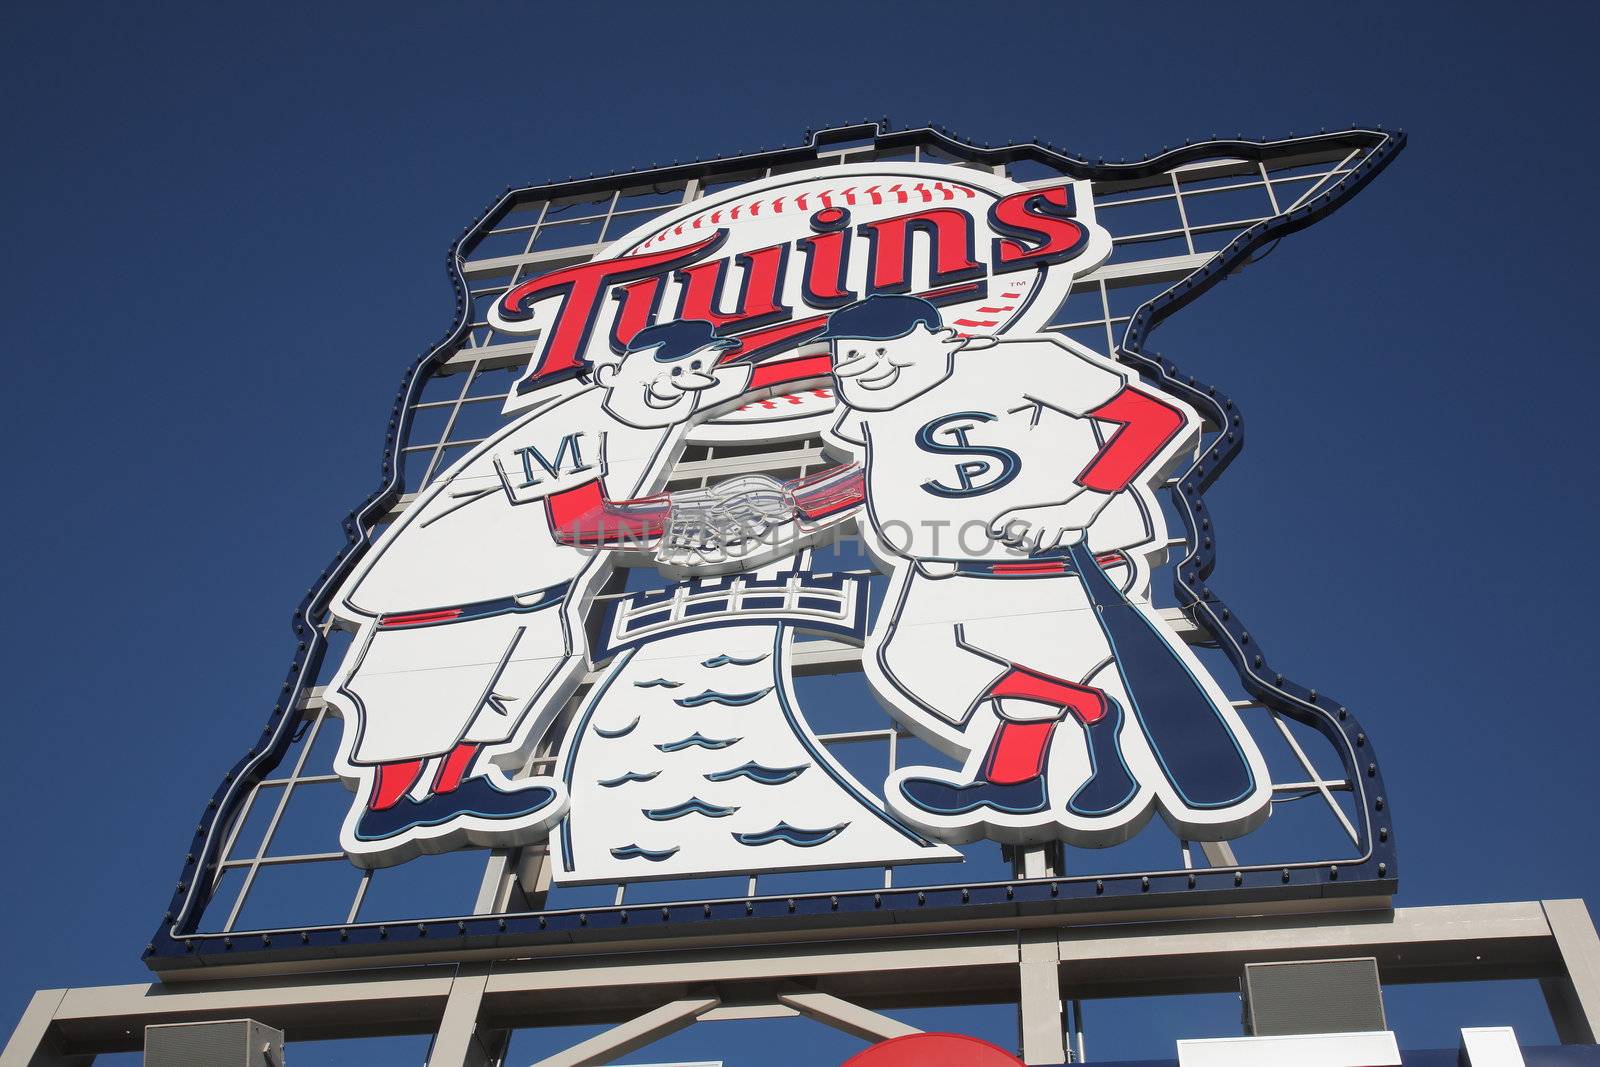 Classic Twins logo installed at new outdoor stadium